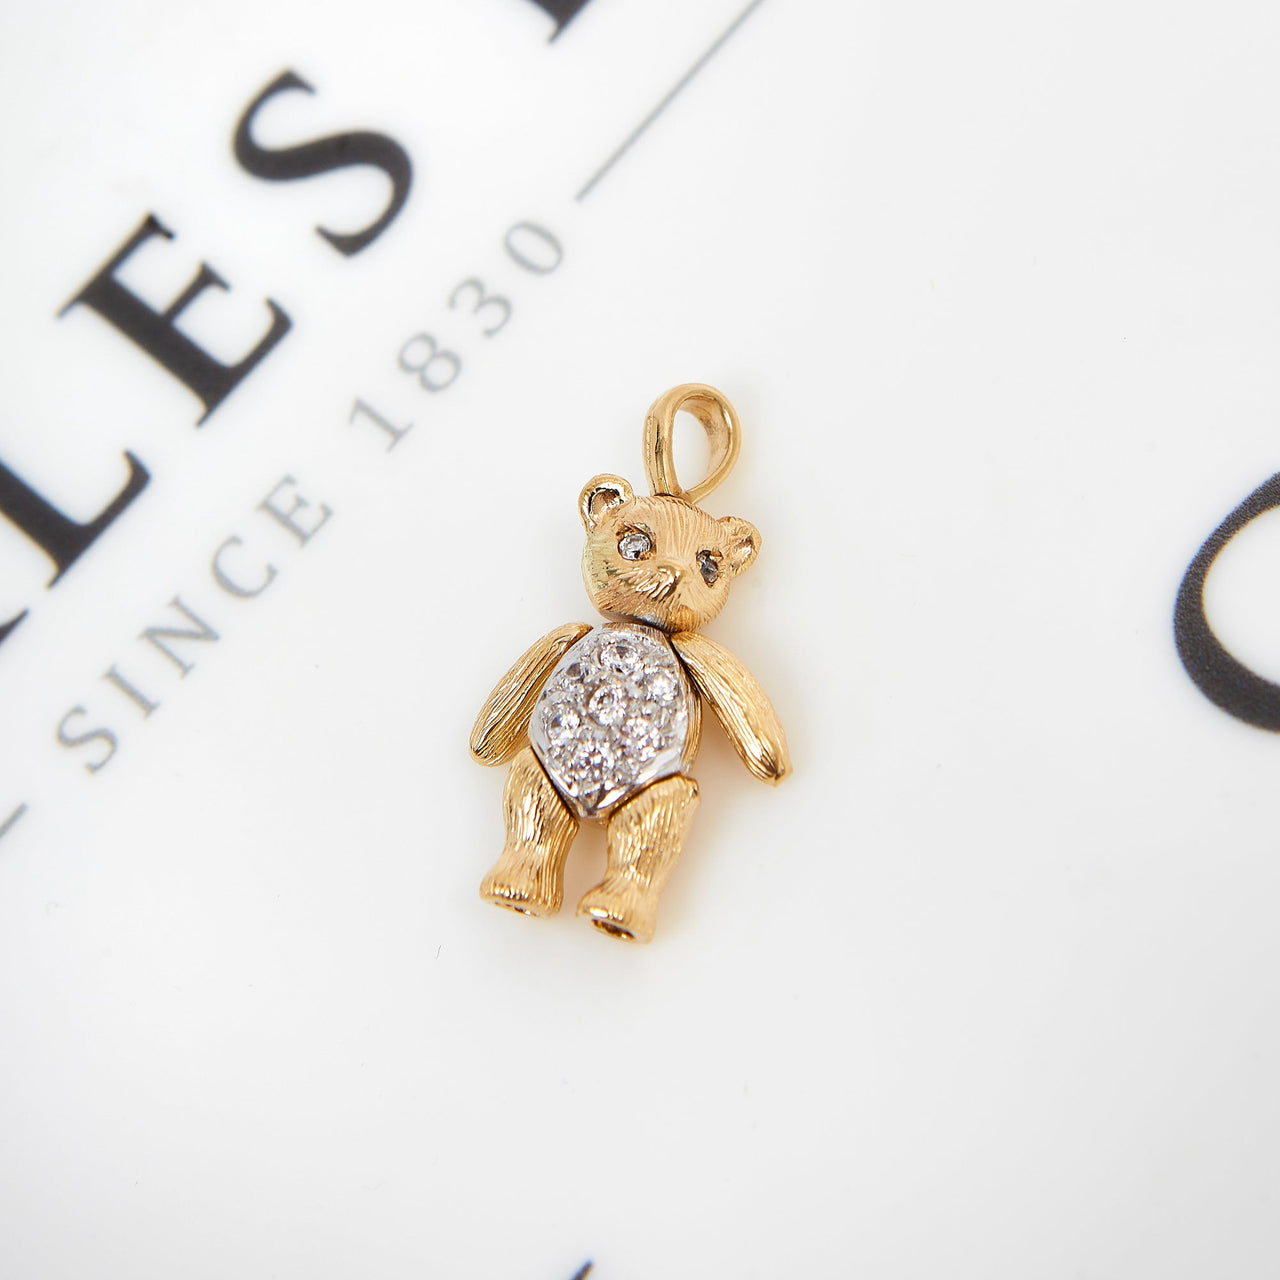 Buy 14k Real Gold Pendants Necklace,14k Real Gold Teddy Bear, 14k Gold  Teddy Bear, Women and Men Charm Online in India - Etsy